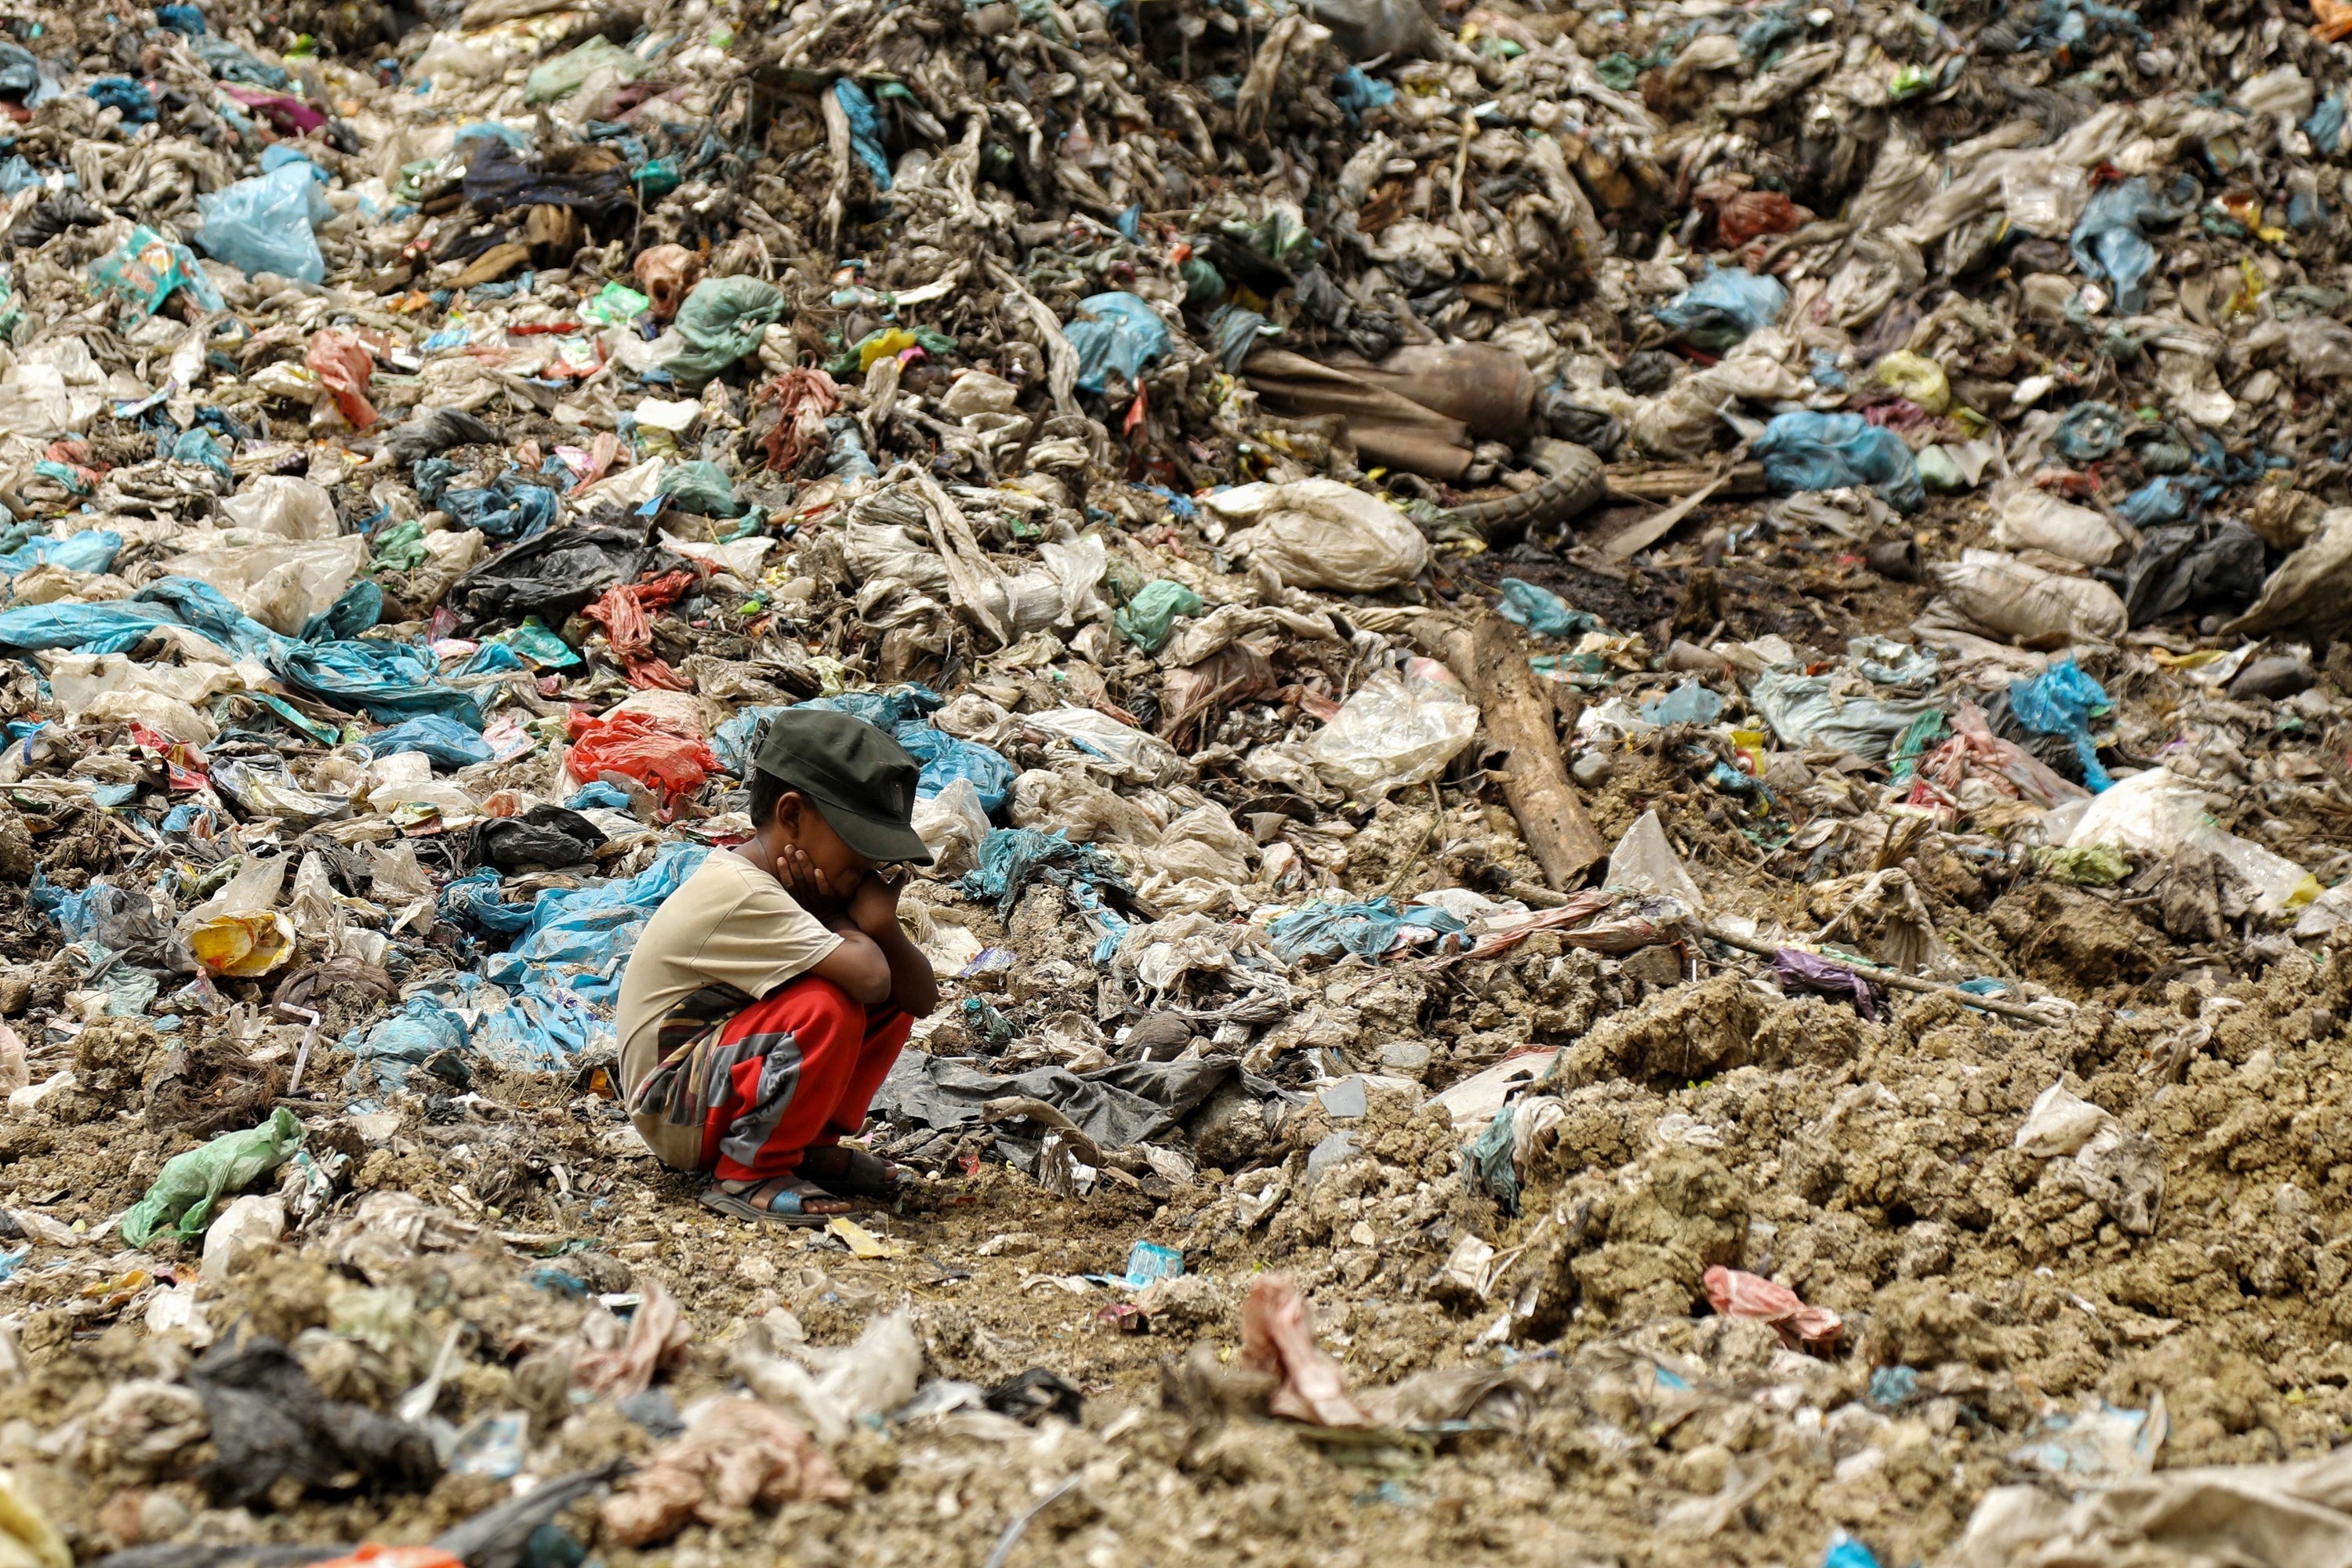 A young boy sits among trash in a landfill